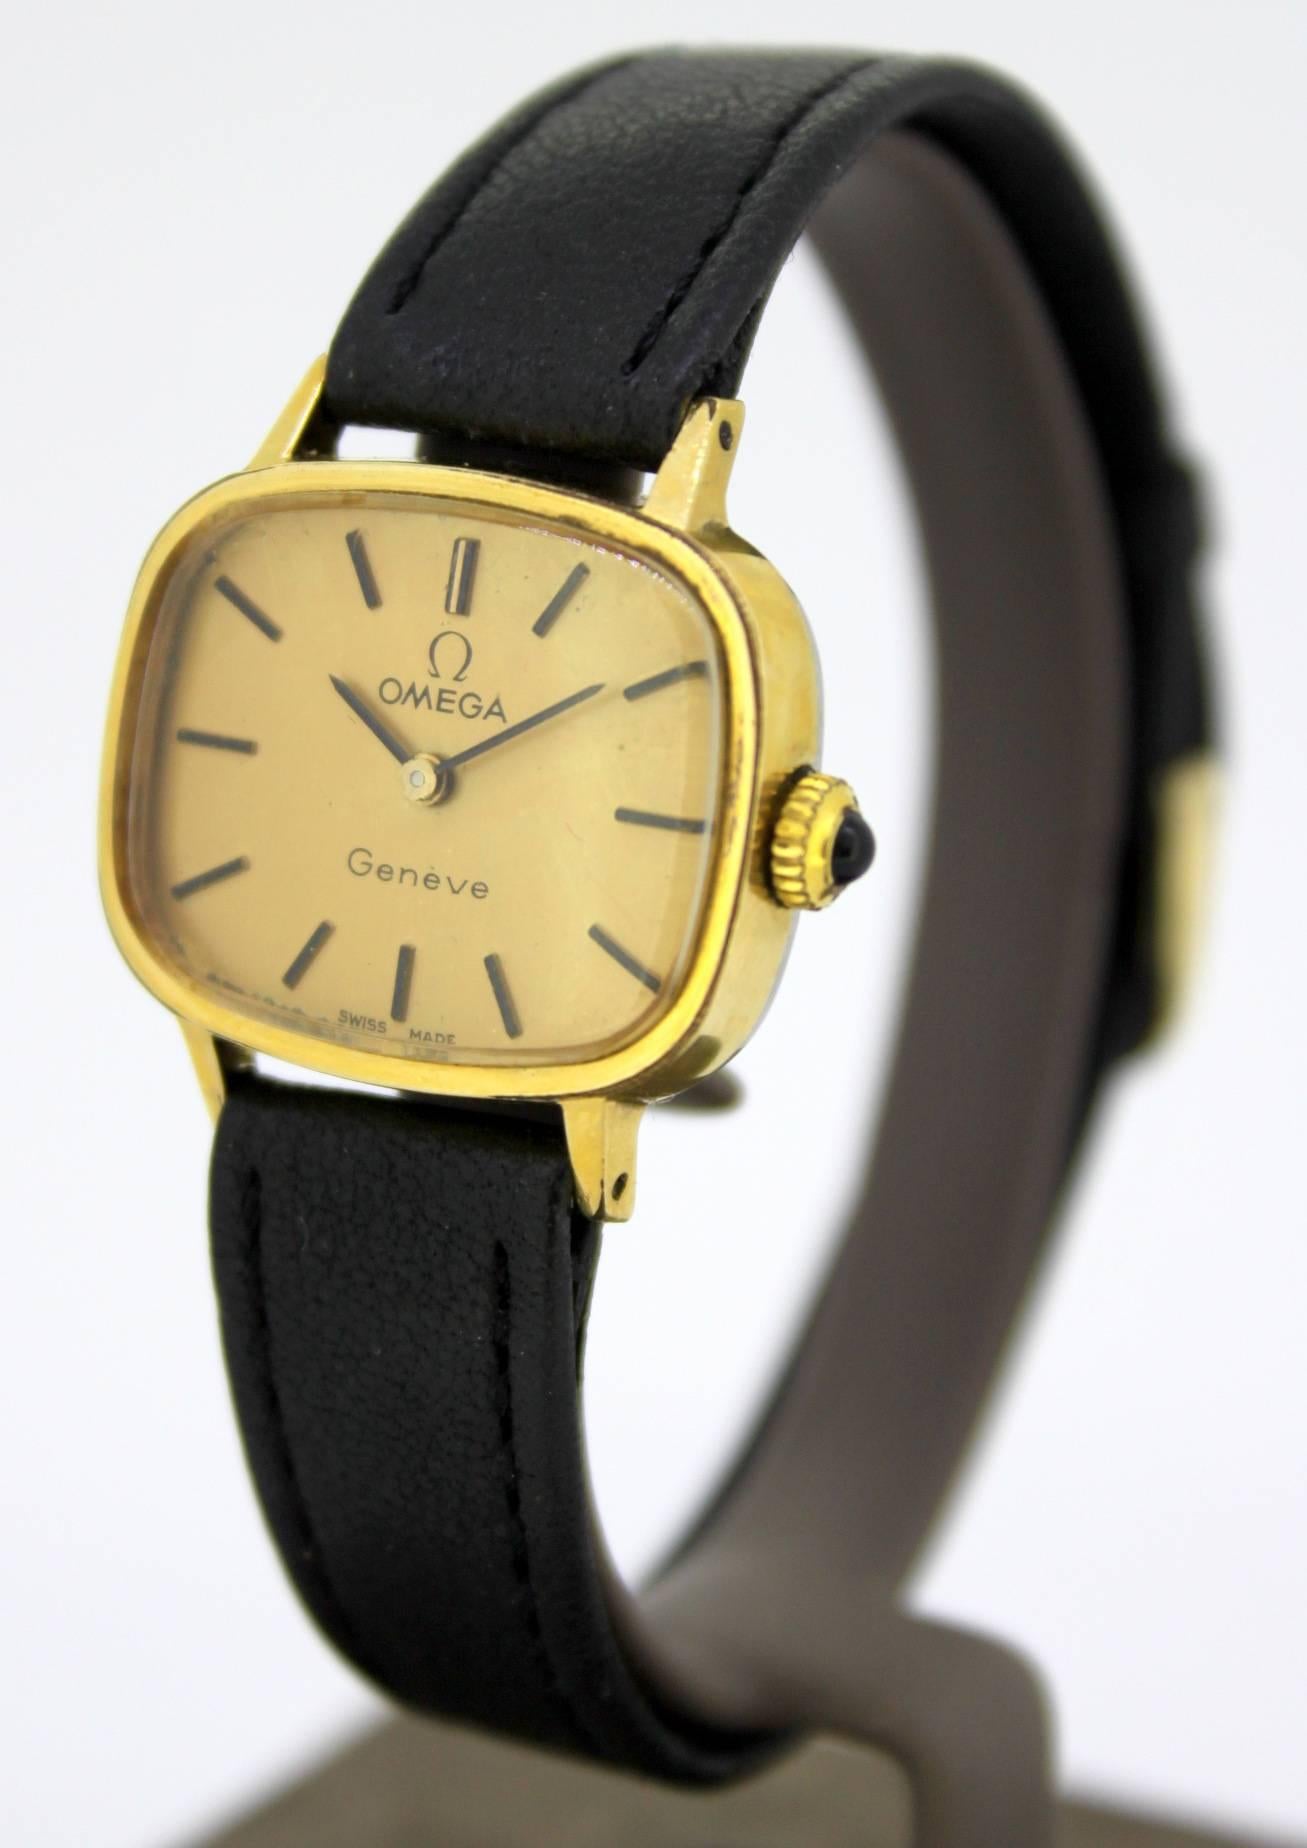 Vintage ladies Omega wristwatch, C.1950's

Gender: Ladies
Case size: 27 x 25 mm
Movement: Manual Winding
Watchband Material: Leather
Case material : Gold Plated
Display Type:	Analogue	
Dial: Gold ( See Photos )
Year : 1950's
Hands: Black
Clasp :